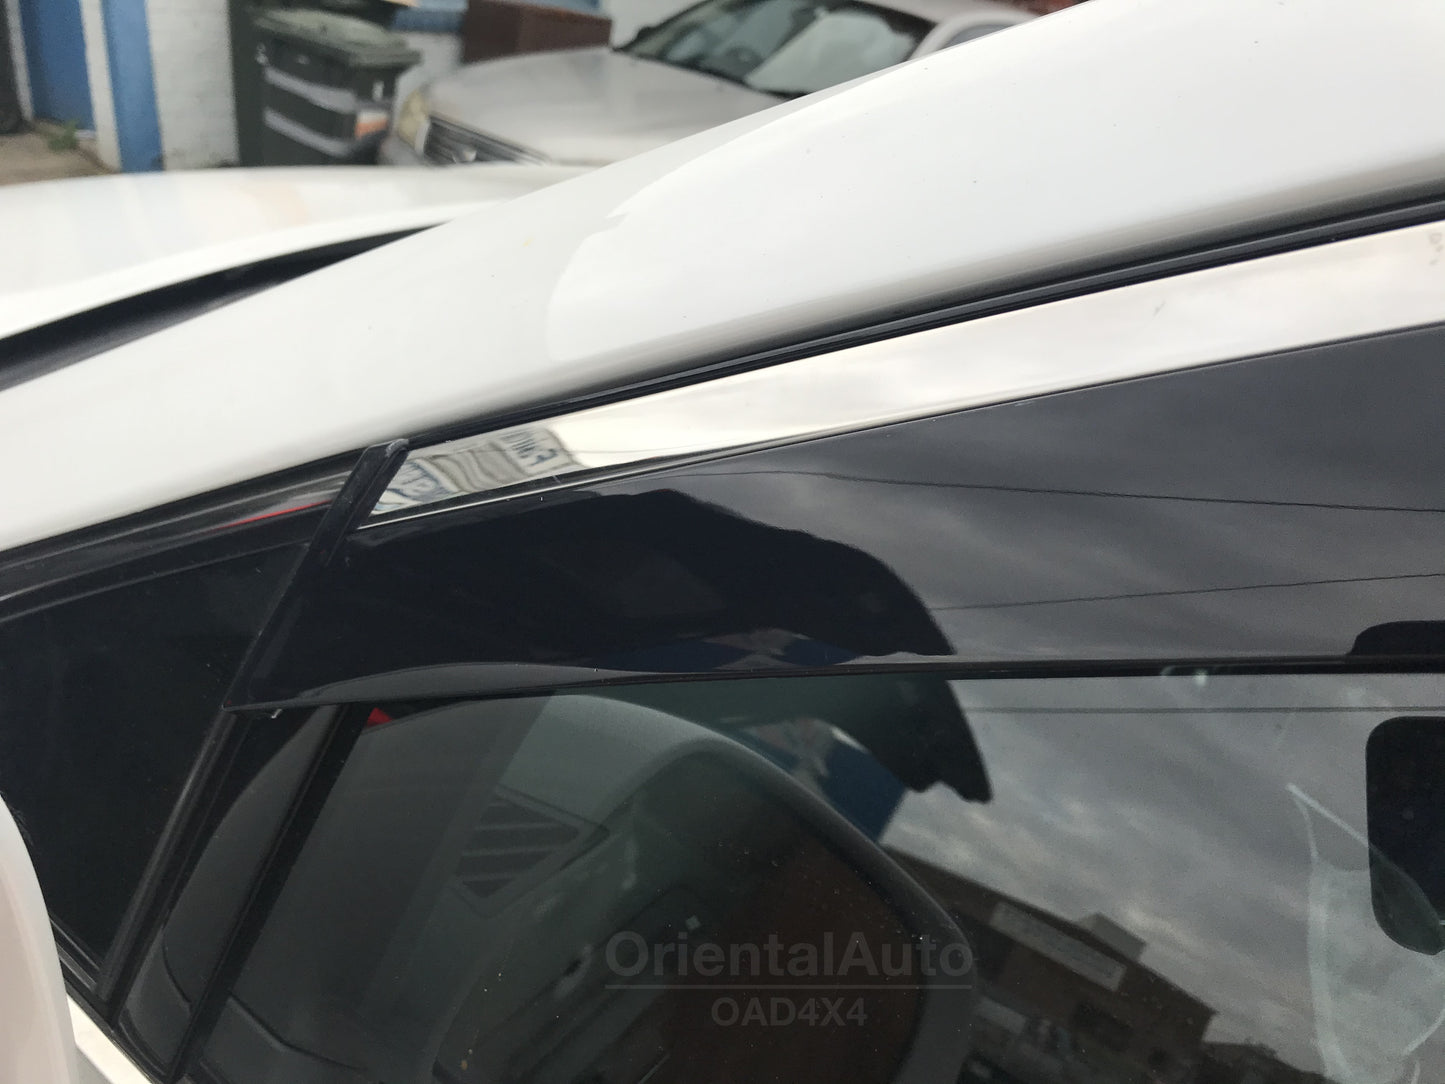 Injection Stainless Weathershields For Lexus RX270/350/450H 2009-2015 Weather Shields Window Visor